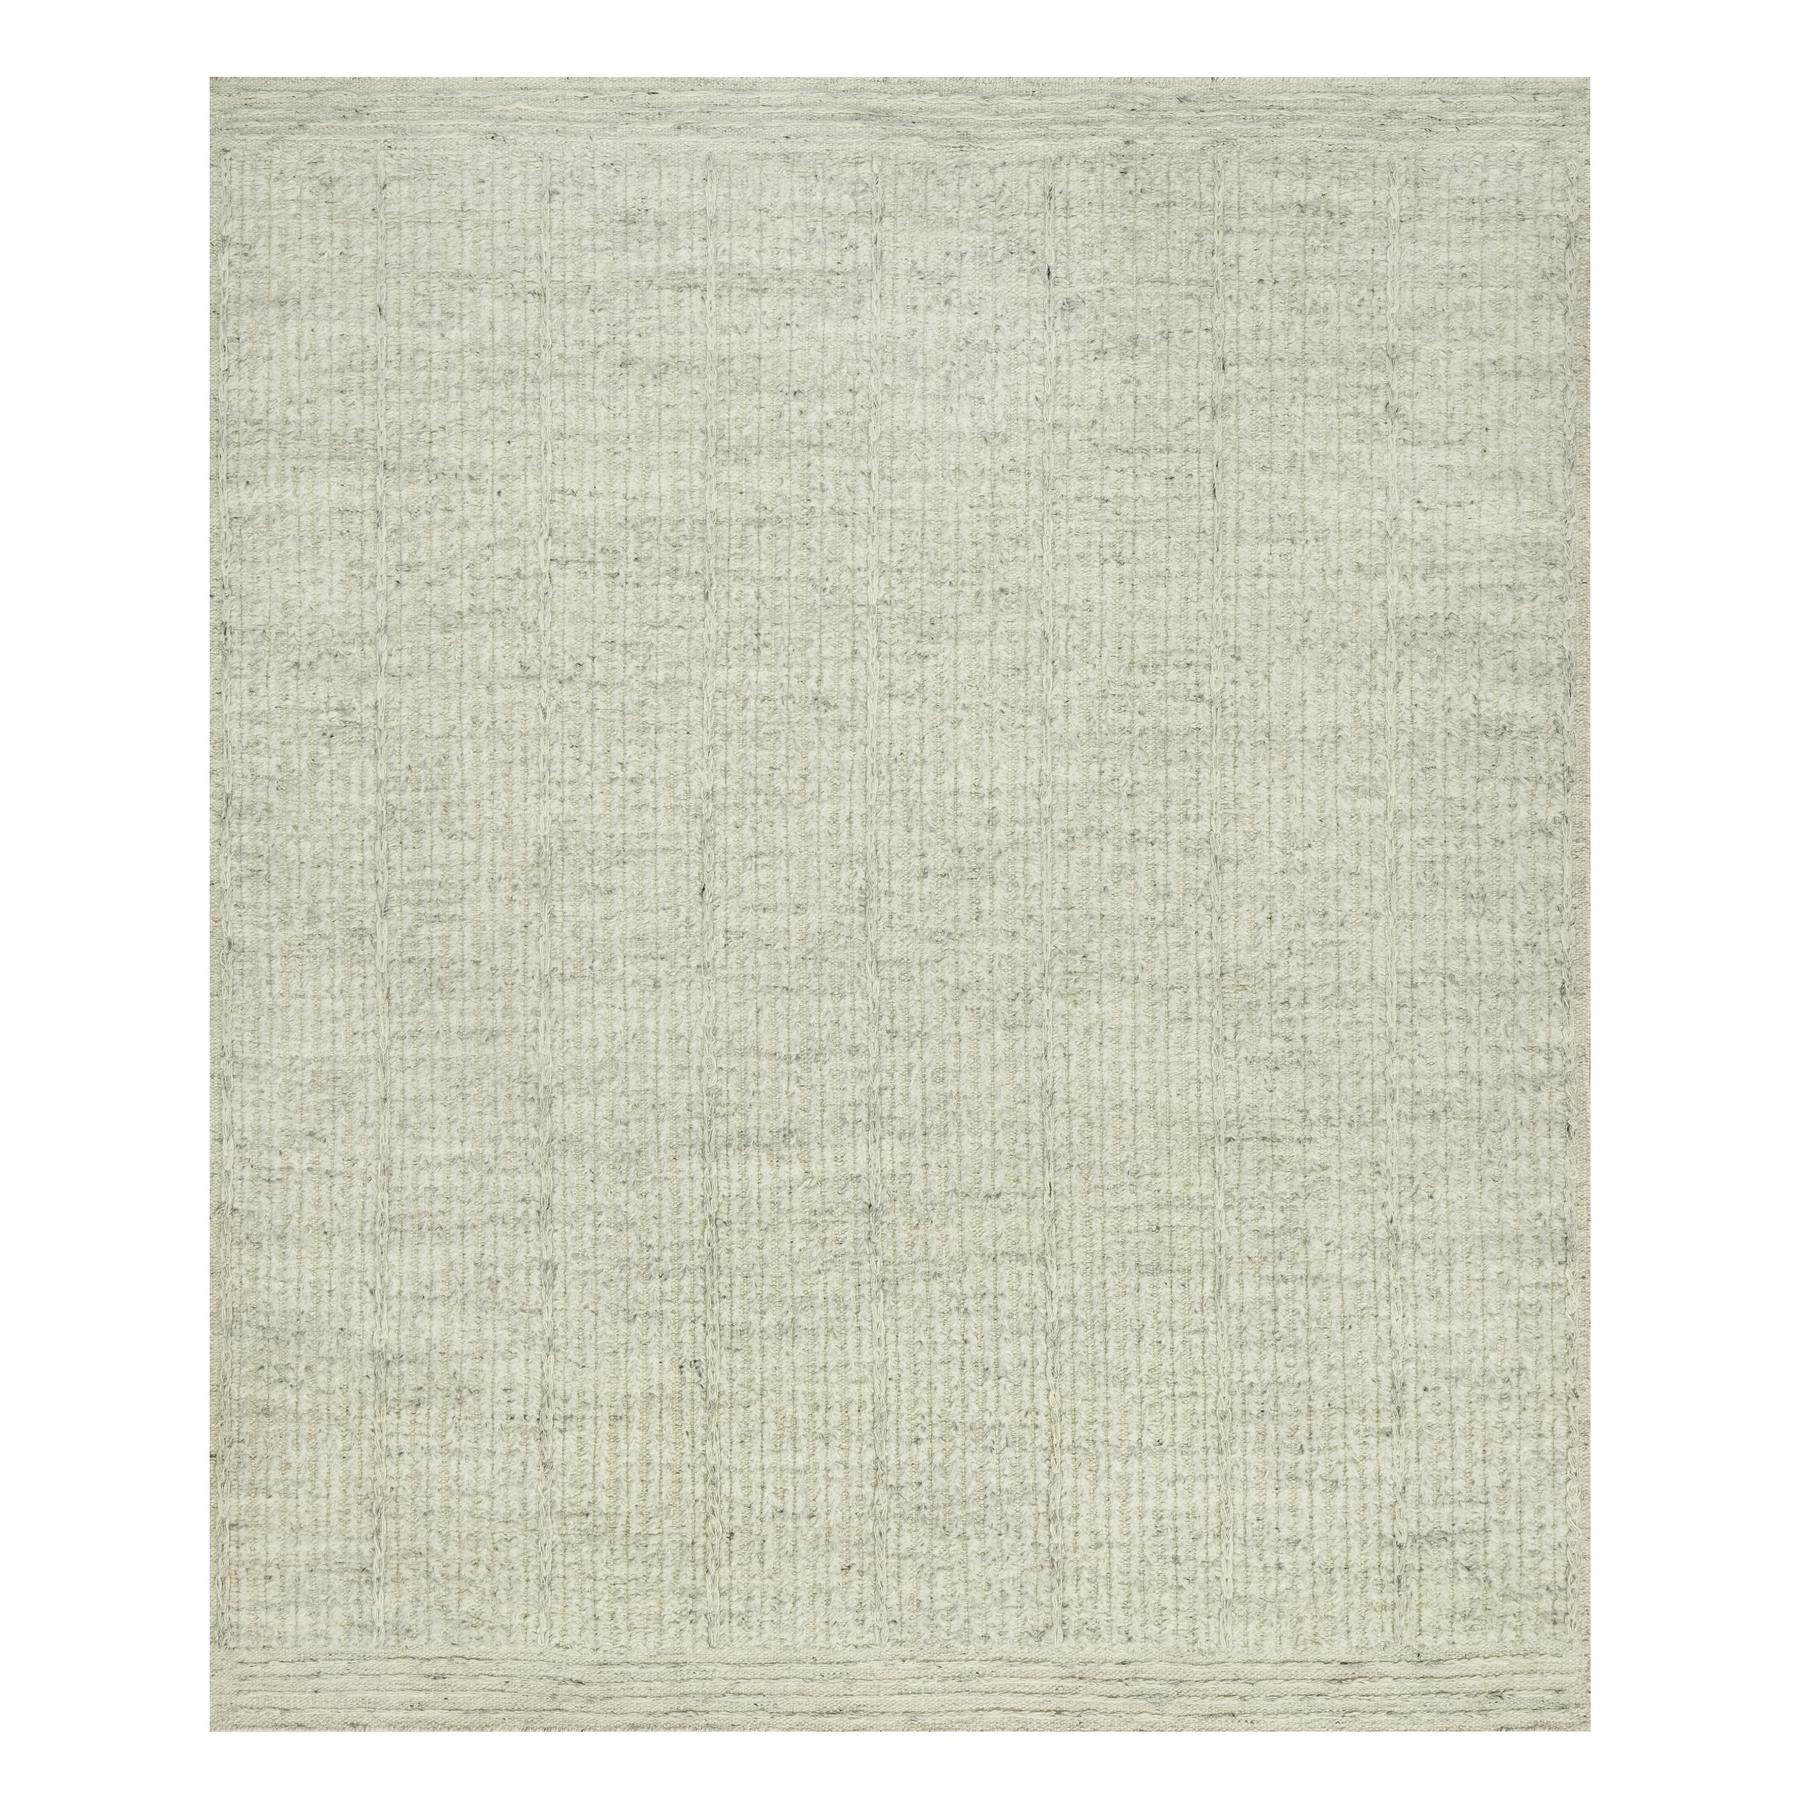 traditional Wool Hand-Woven Area Rug 8'4